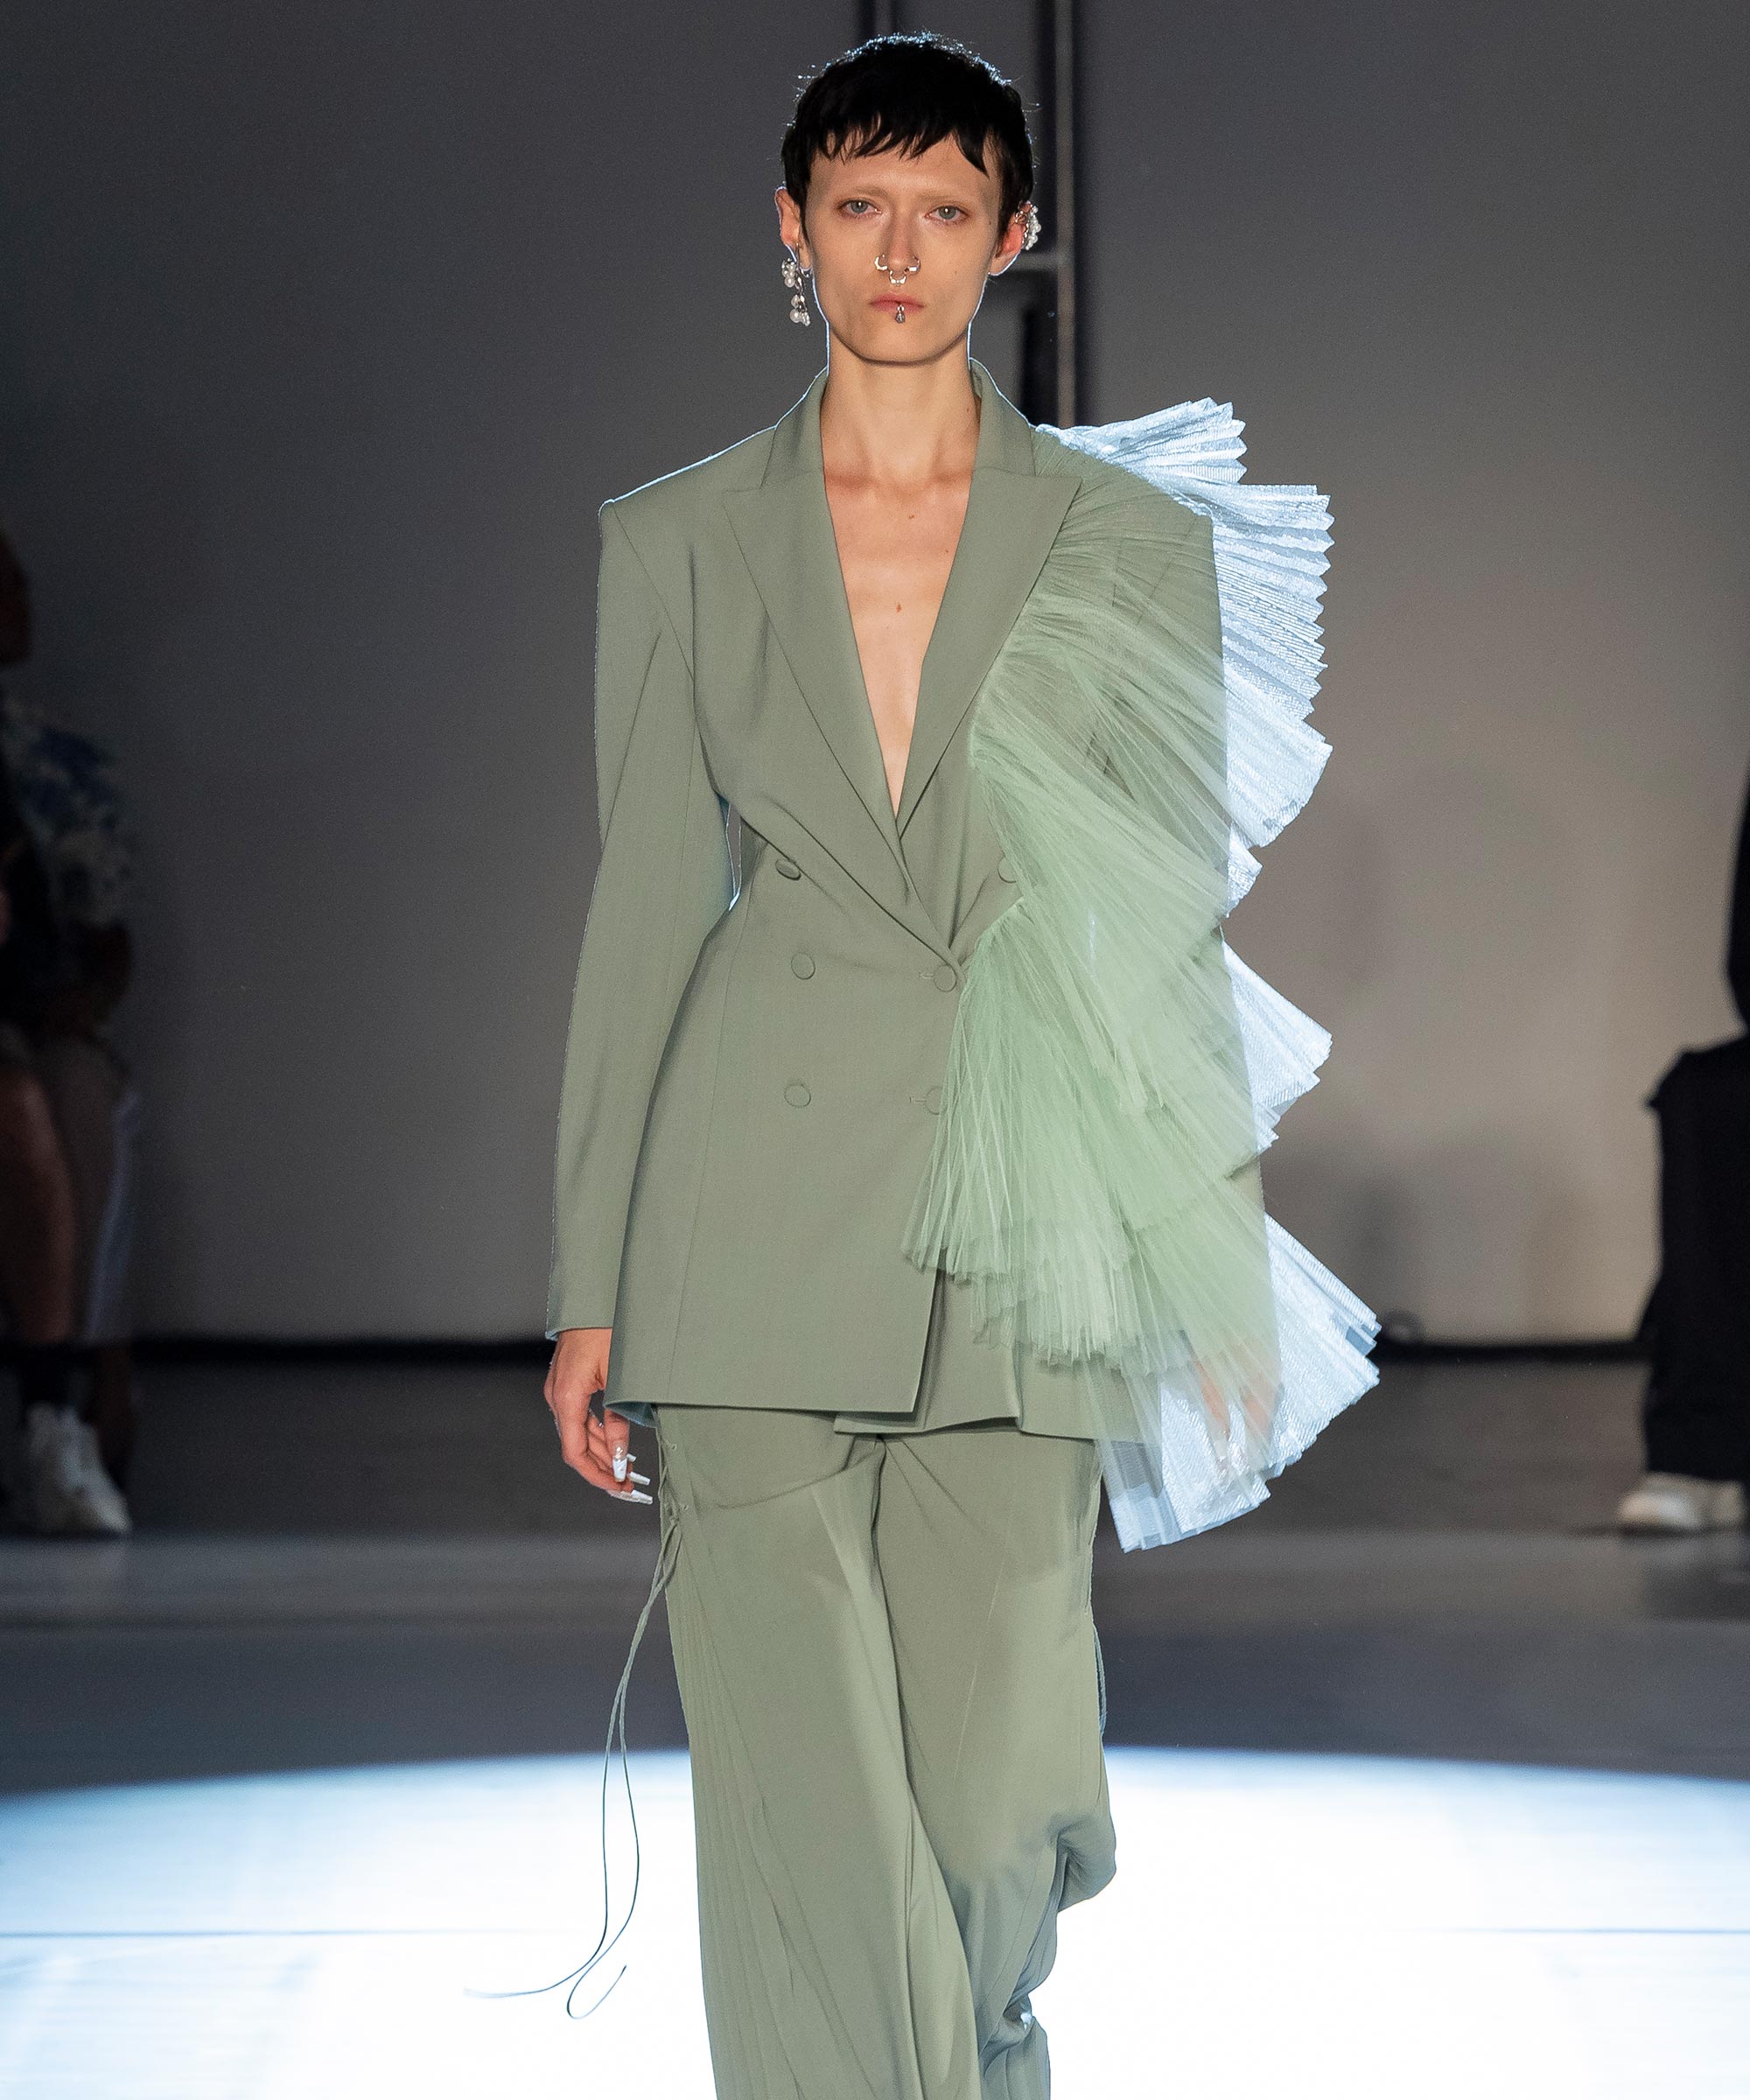 The 5 Best Sheer Looks from New York Fashion Week - Swimsuit